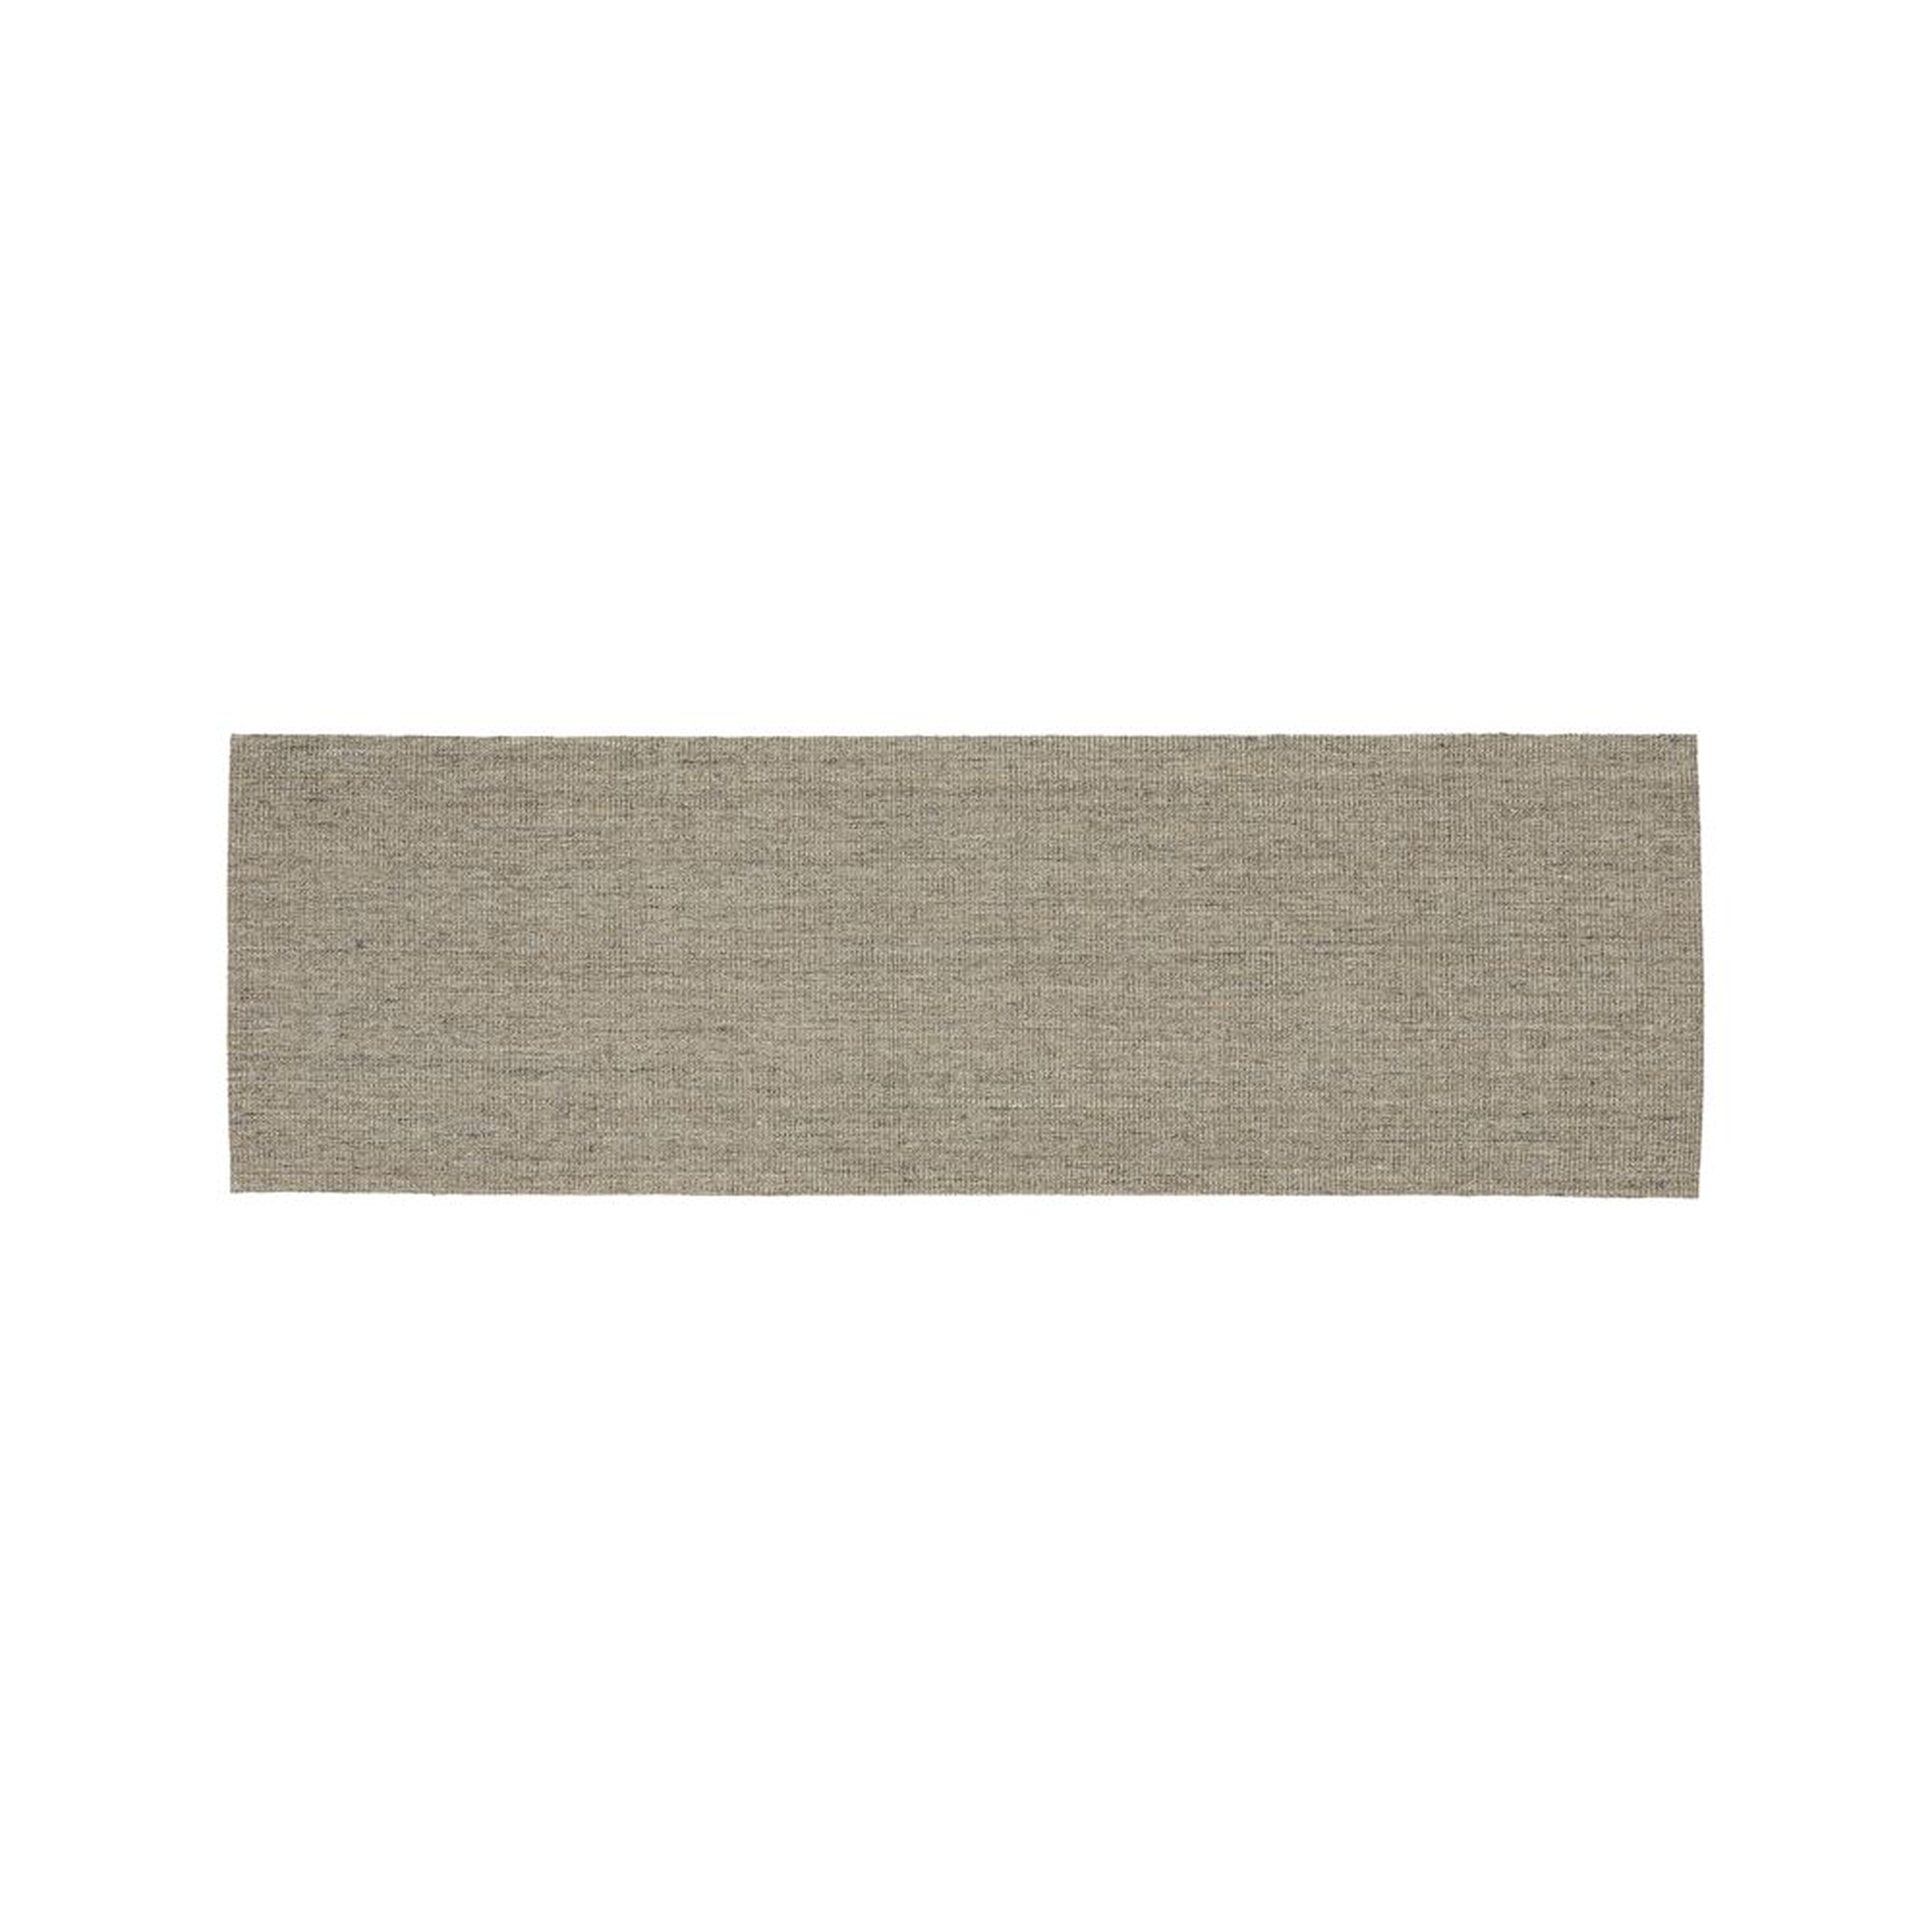 Sisal Heritage Taupe Rug Runner 2.5'x8' - Crate and Barrel